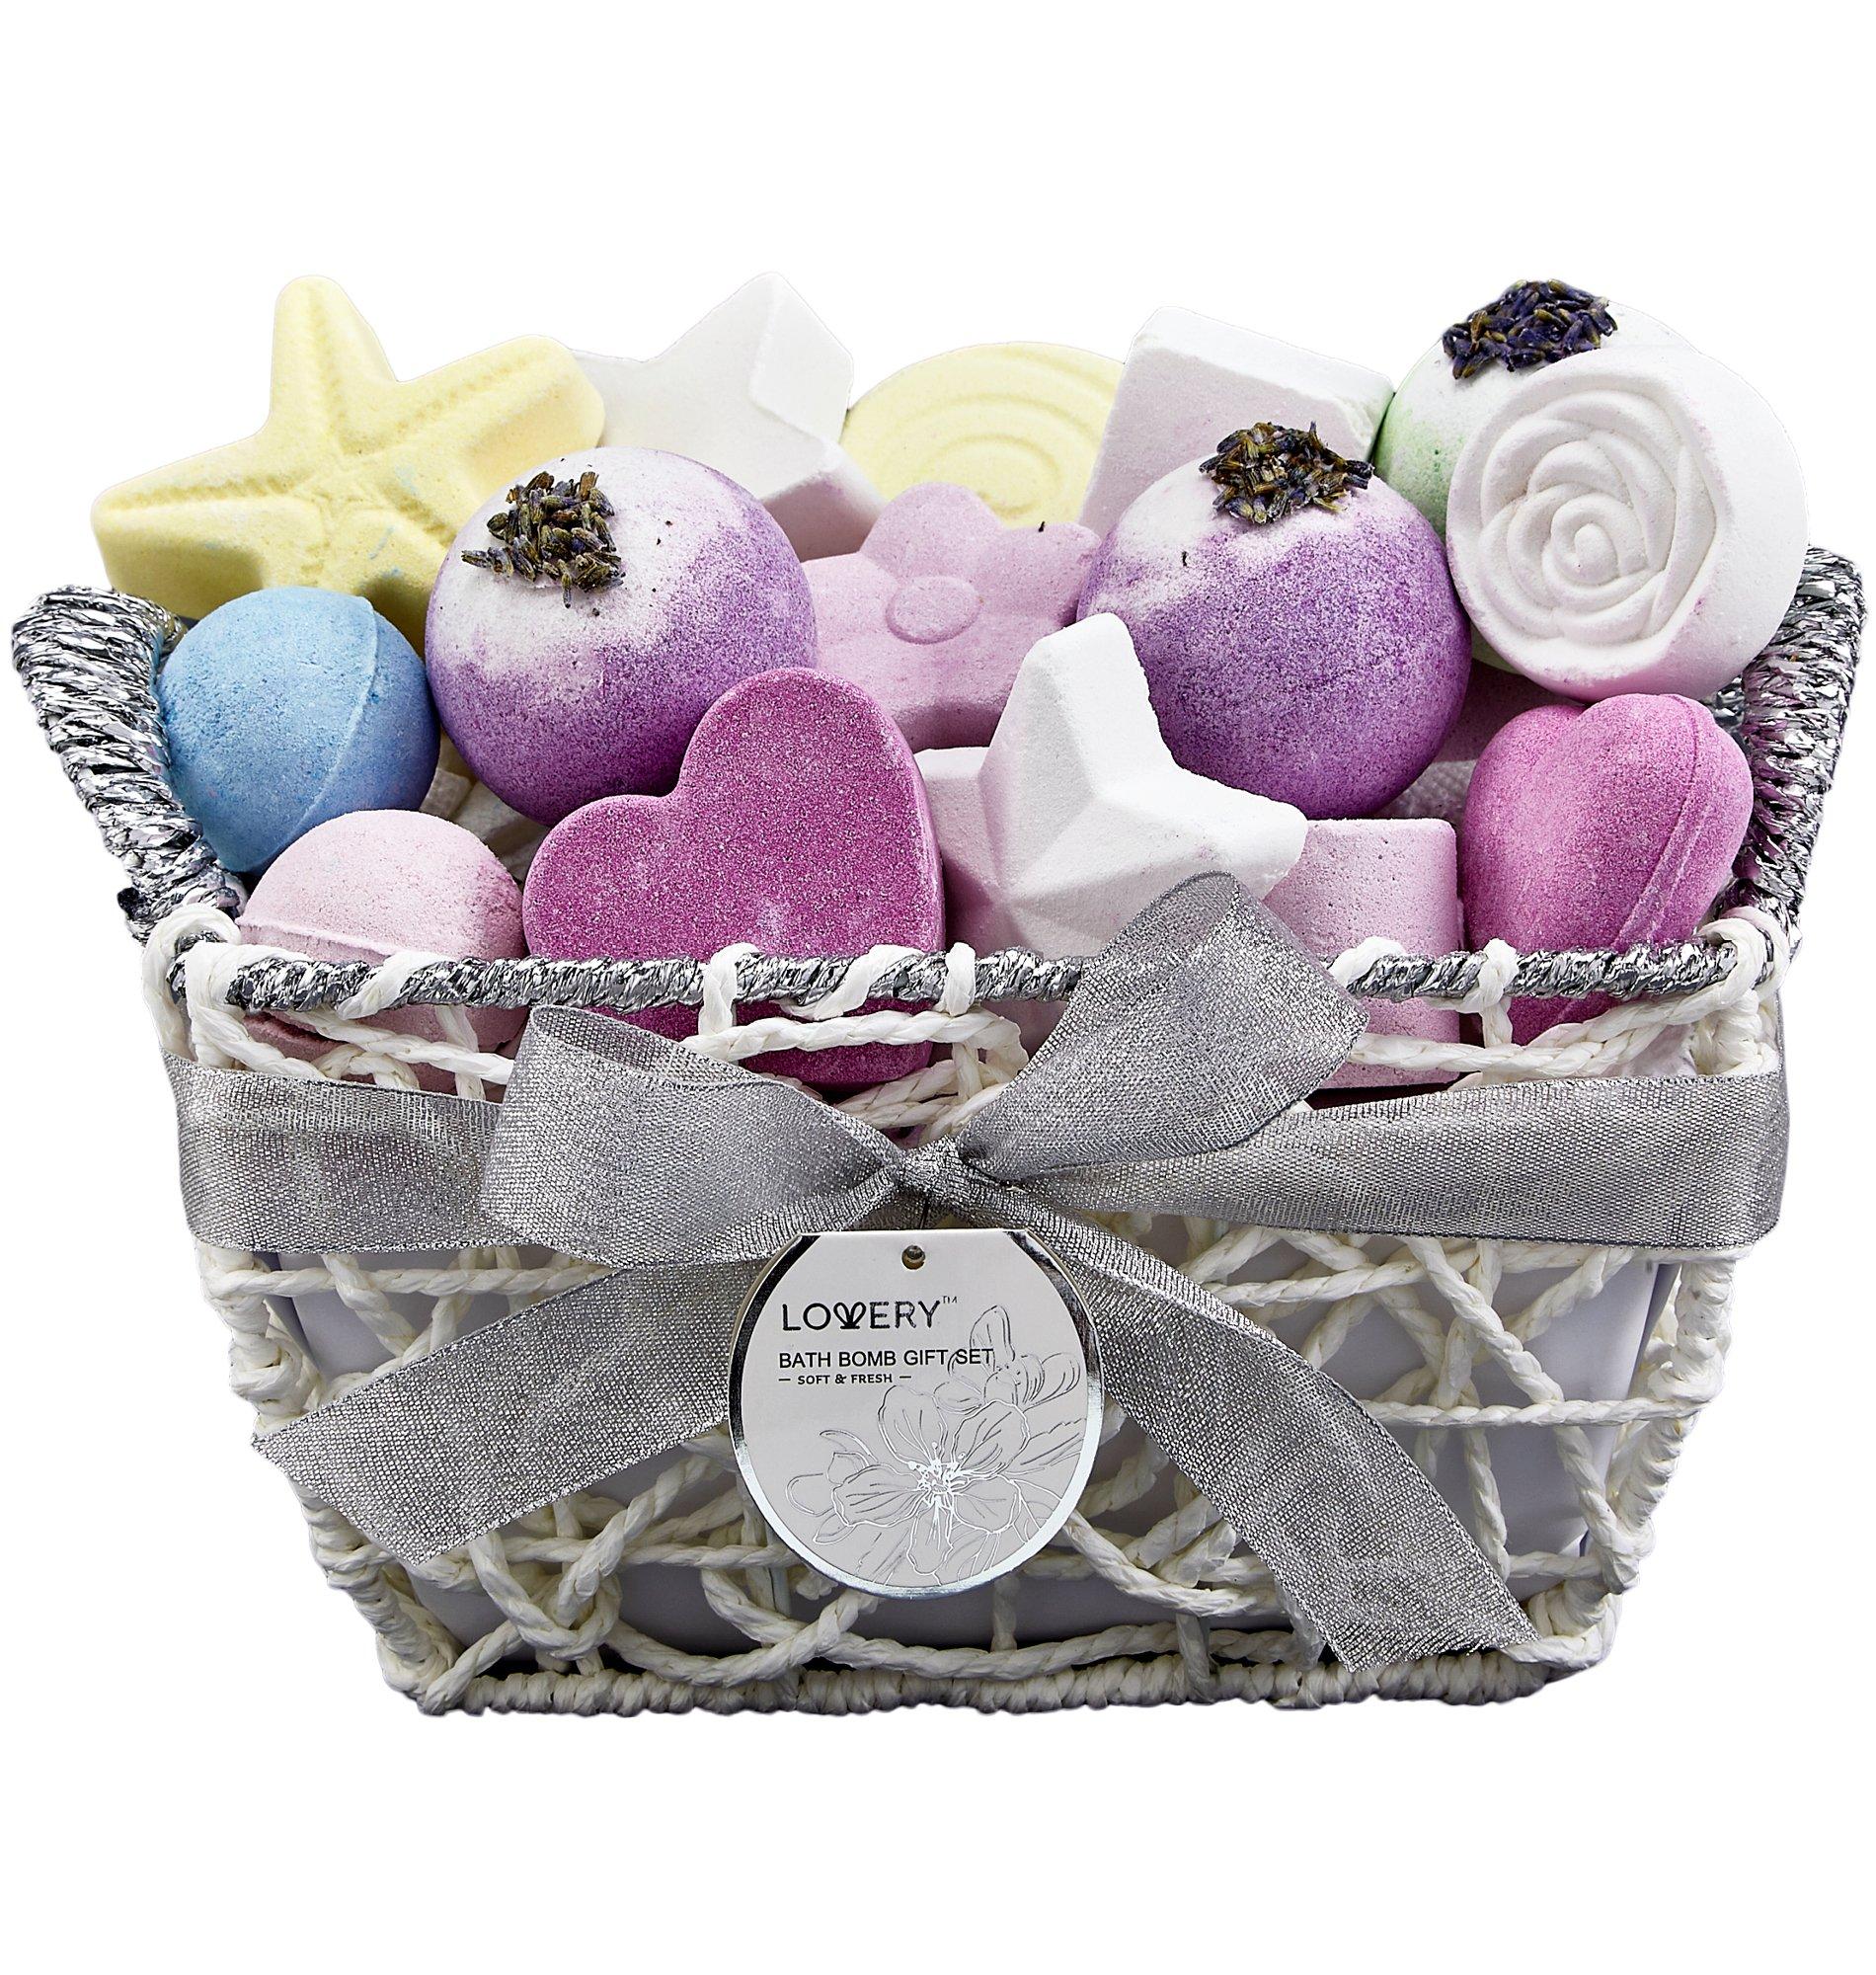 Stress Relief Bath-shower Bombs-Great Fragrance-Birthday Gift for Women-Anxiety Relief Items-Essentials for Women-Natural Bath Bombs-Aromatherapy